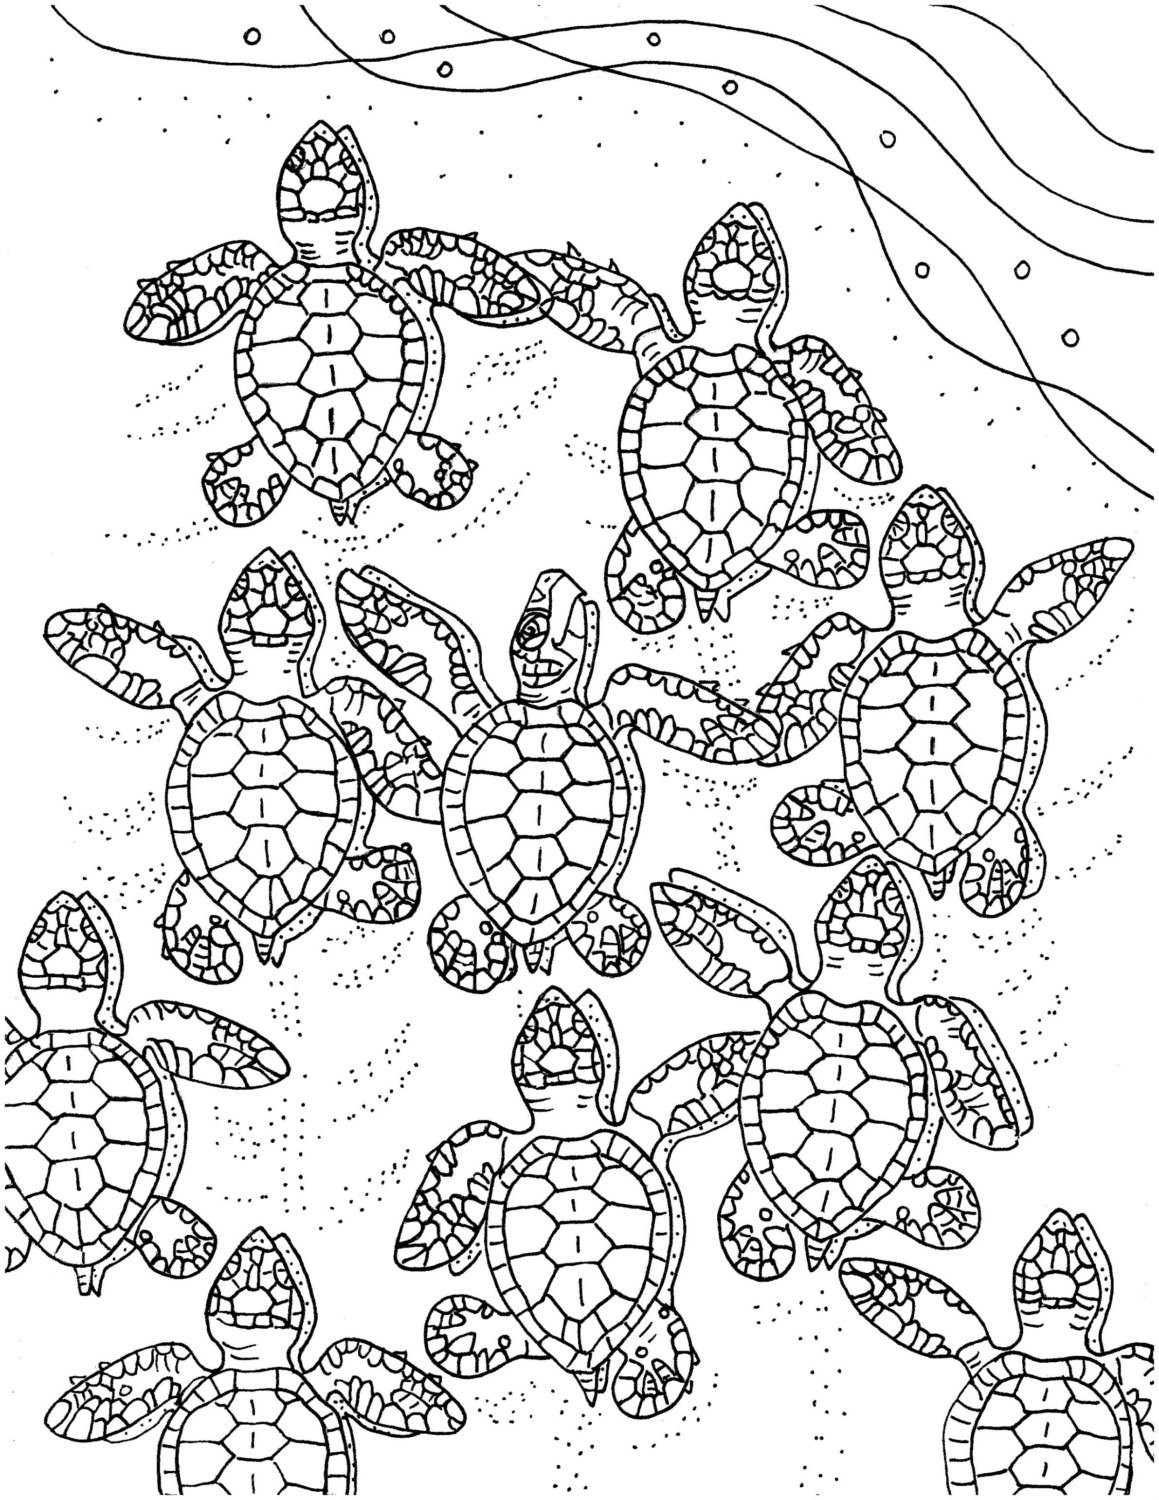 Sea Turtle Coloring Pages For Adults
 Baby Sea Turtles coloring page embroidery pattern sea